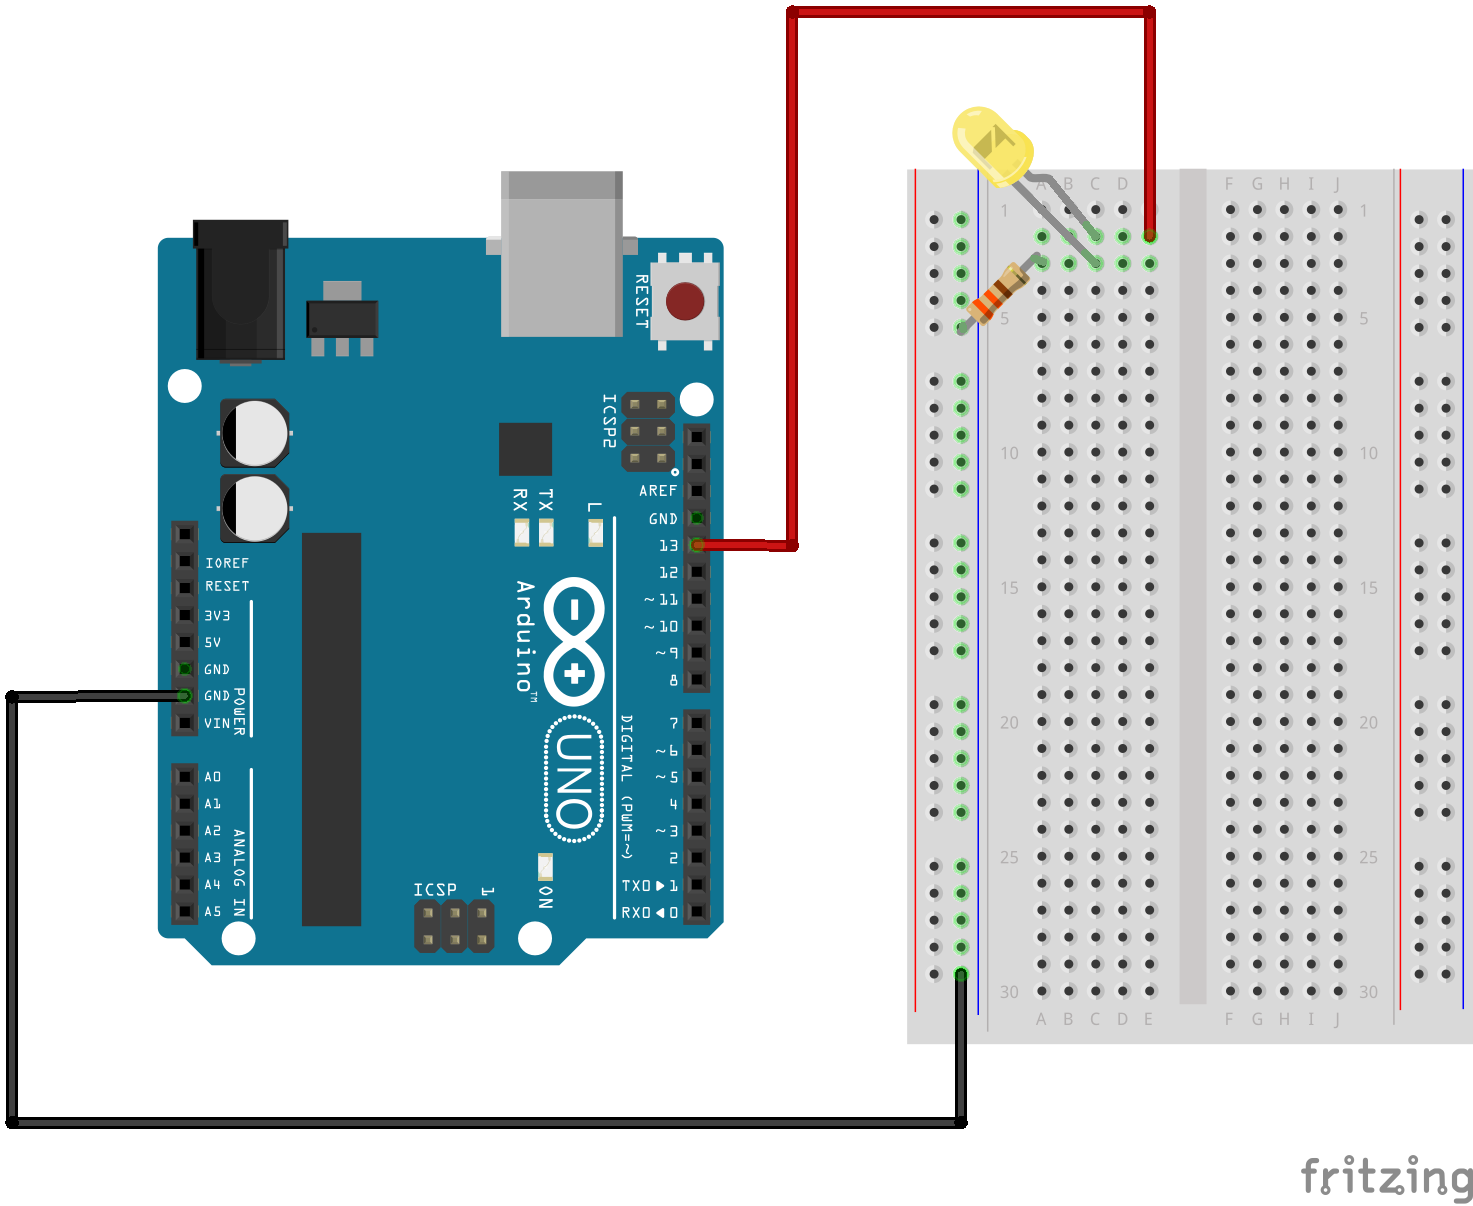 Sway demonstration tofu SIK Experiment Guide for Arduino - V3.2 - SparkFun Learn